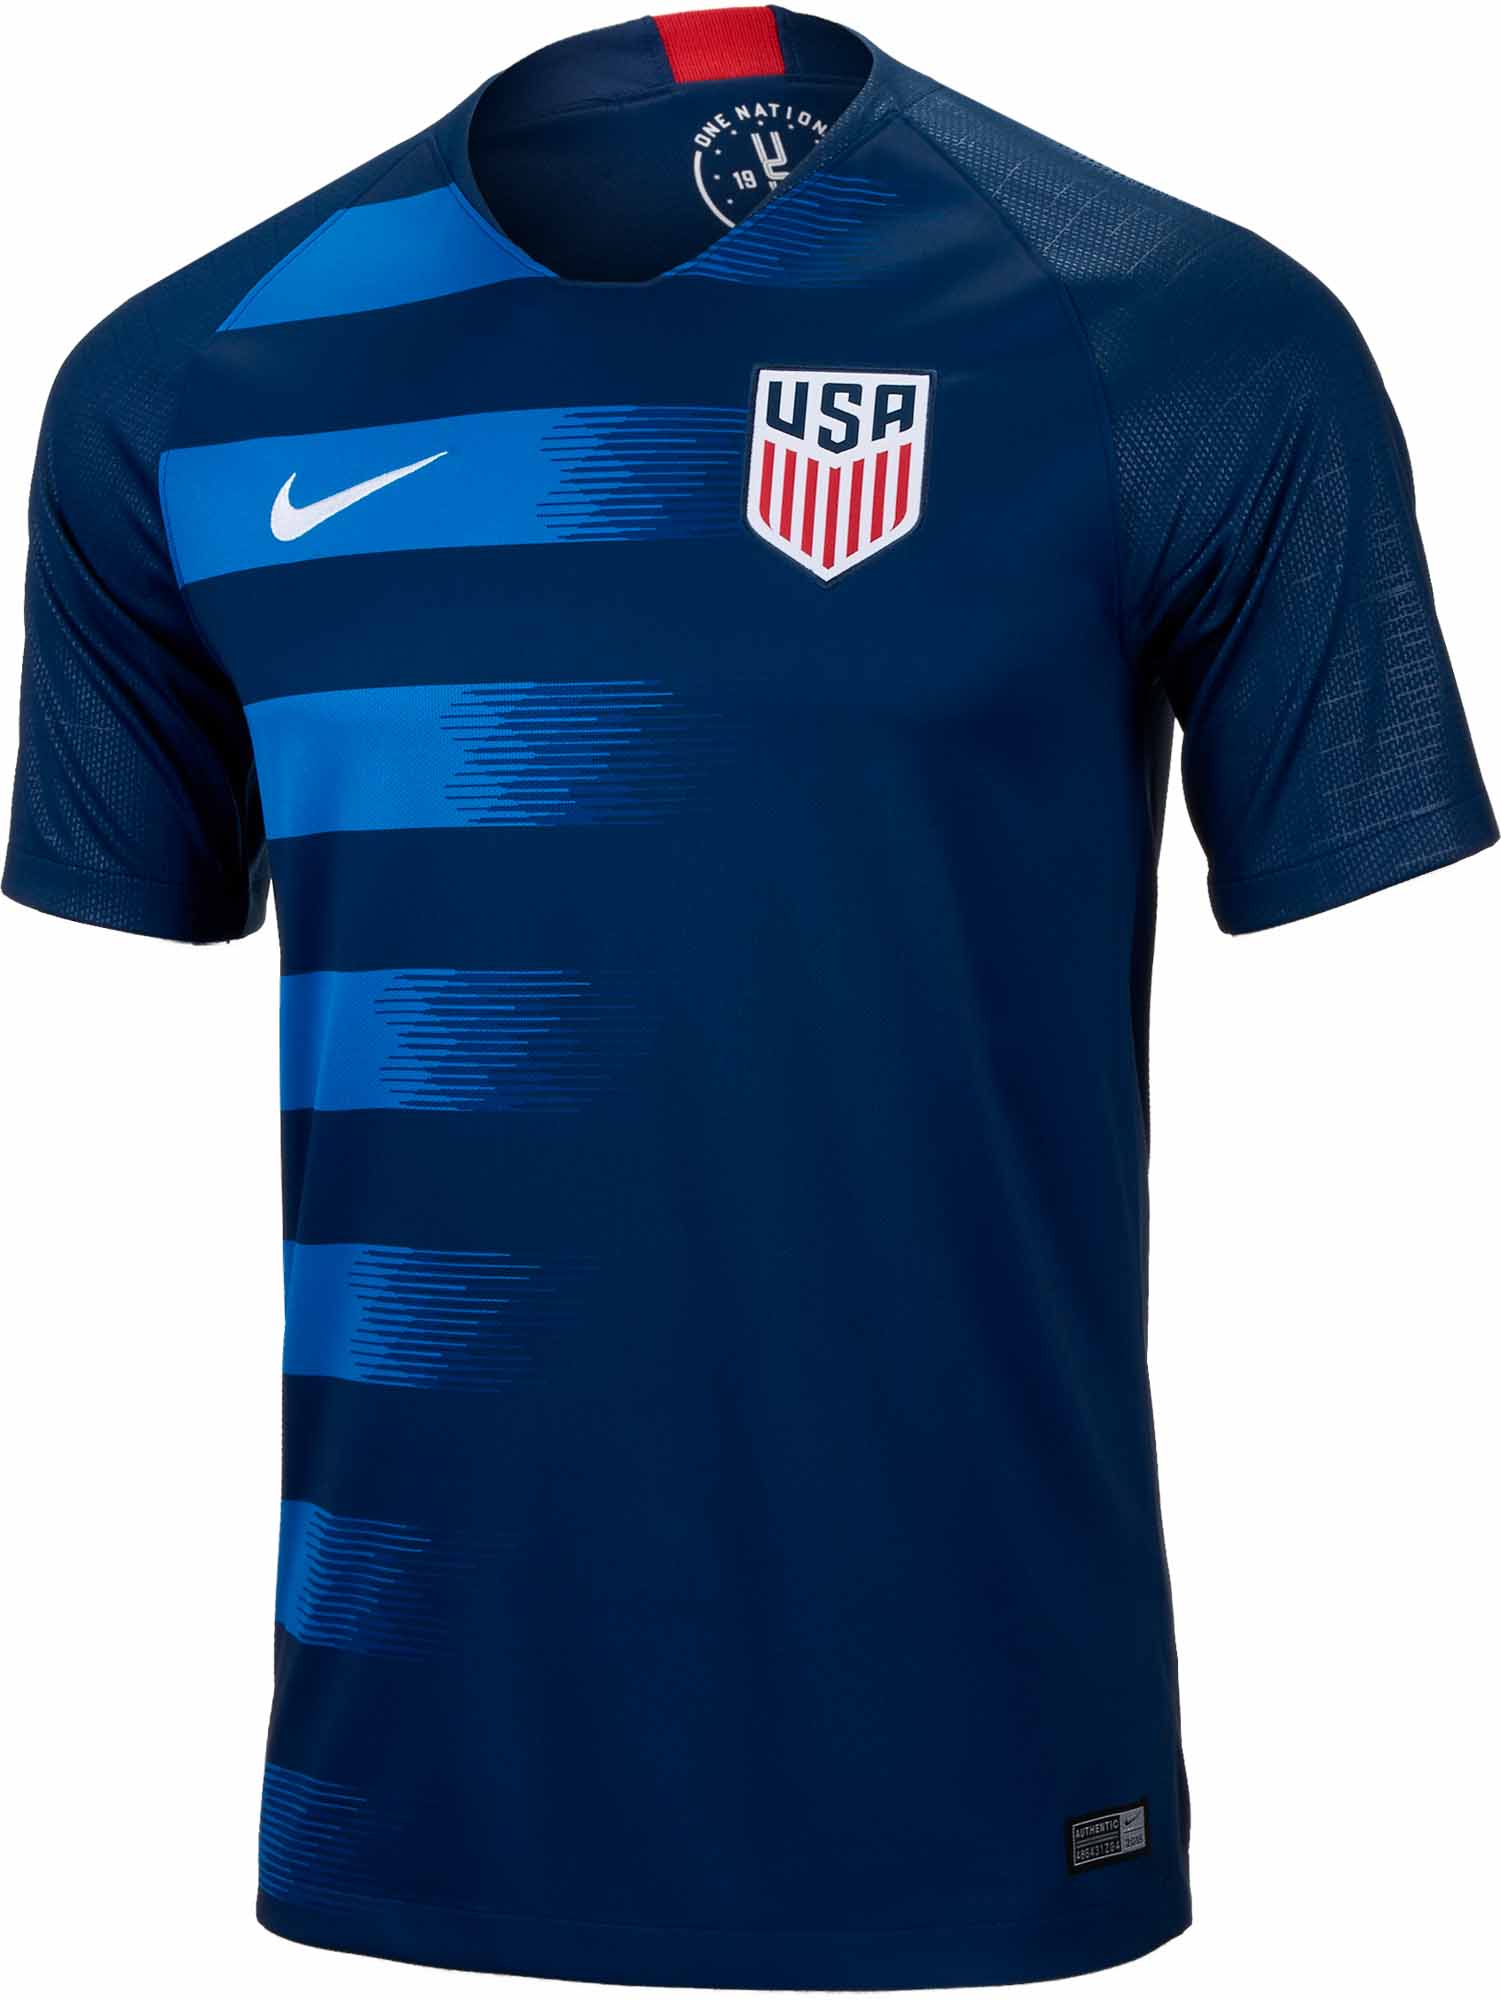 Haul Sales New 2019-2020 USA Away Soccer Jersey & Shorts for Kids/Youths